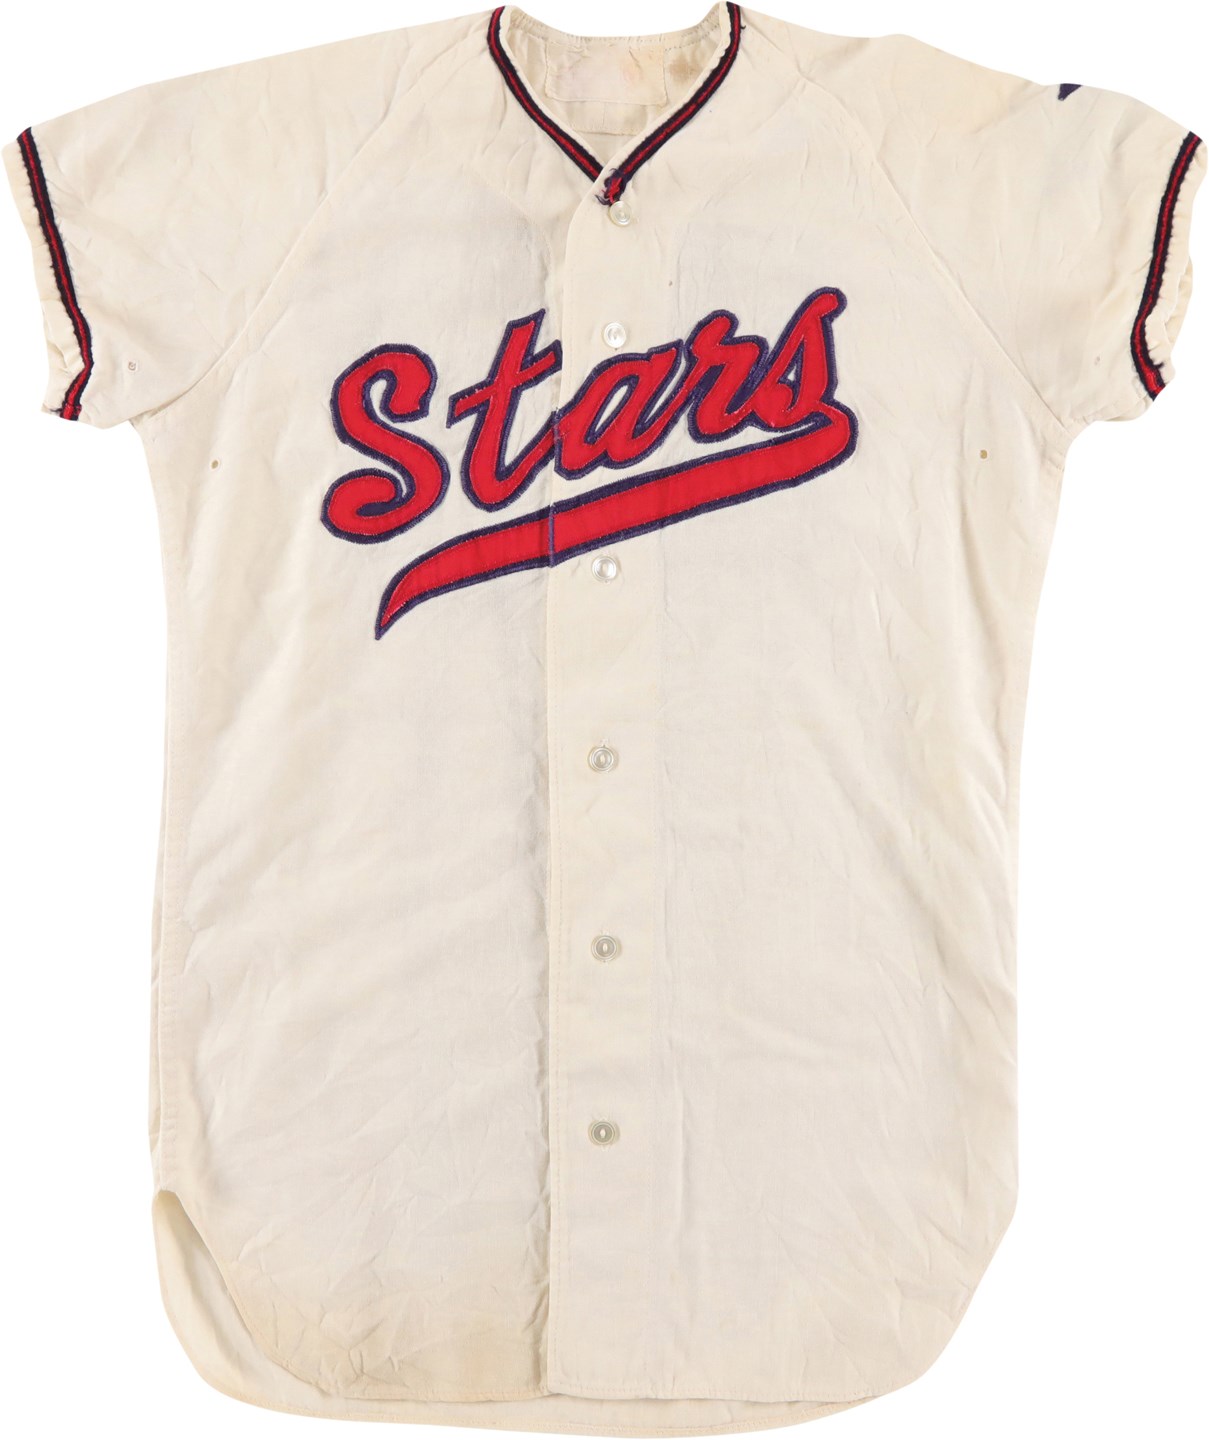 Baseball Equipment - 1950s Hollywood Stars PCL Game Worn Jersey